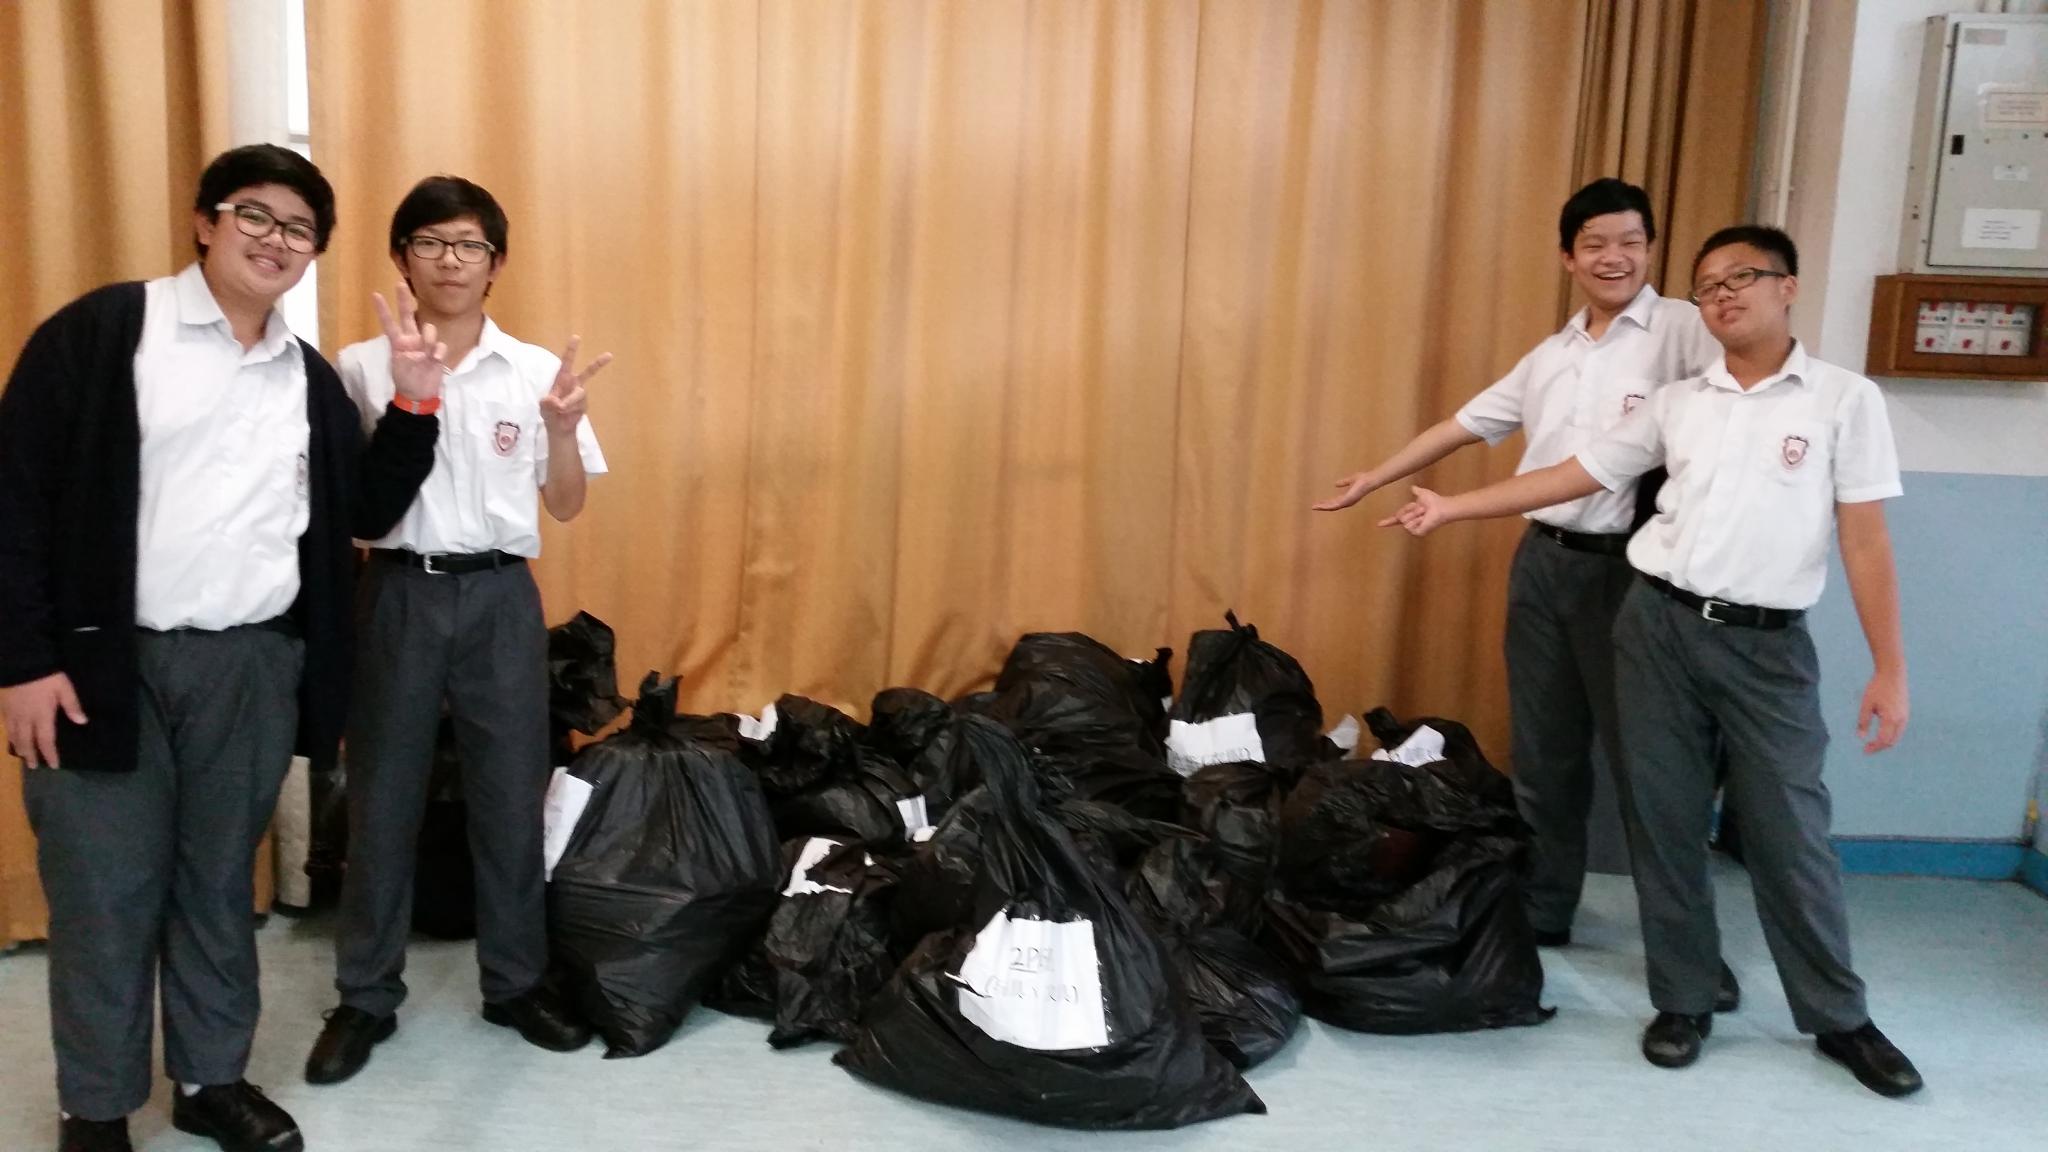 Look at all the old clothes, toys, stationery that are being donated by students and teachers. 